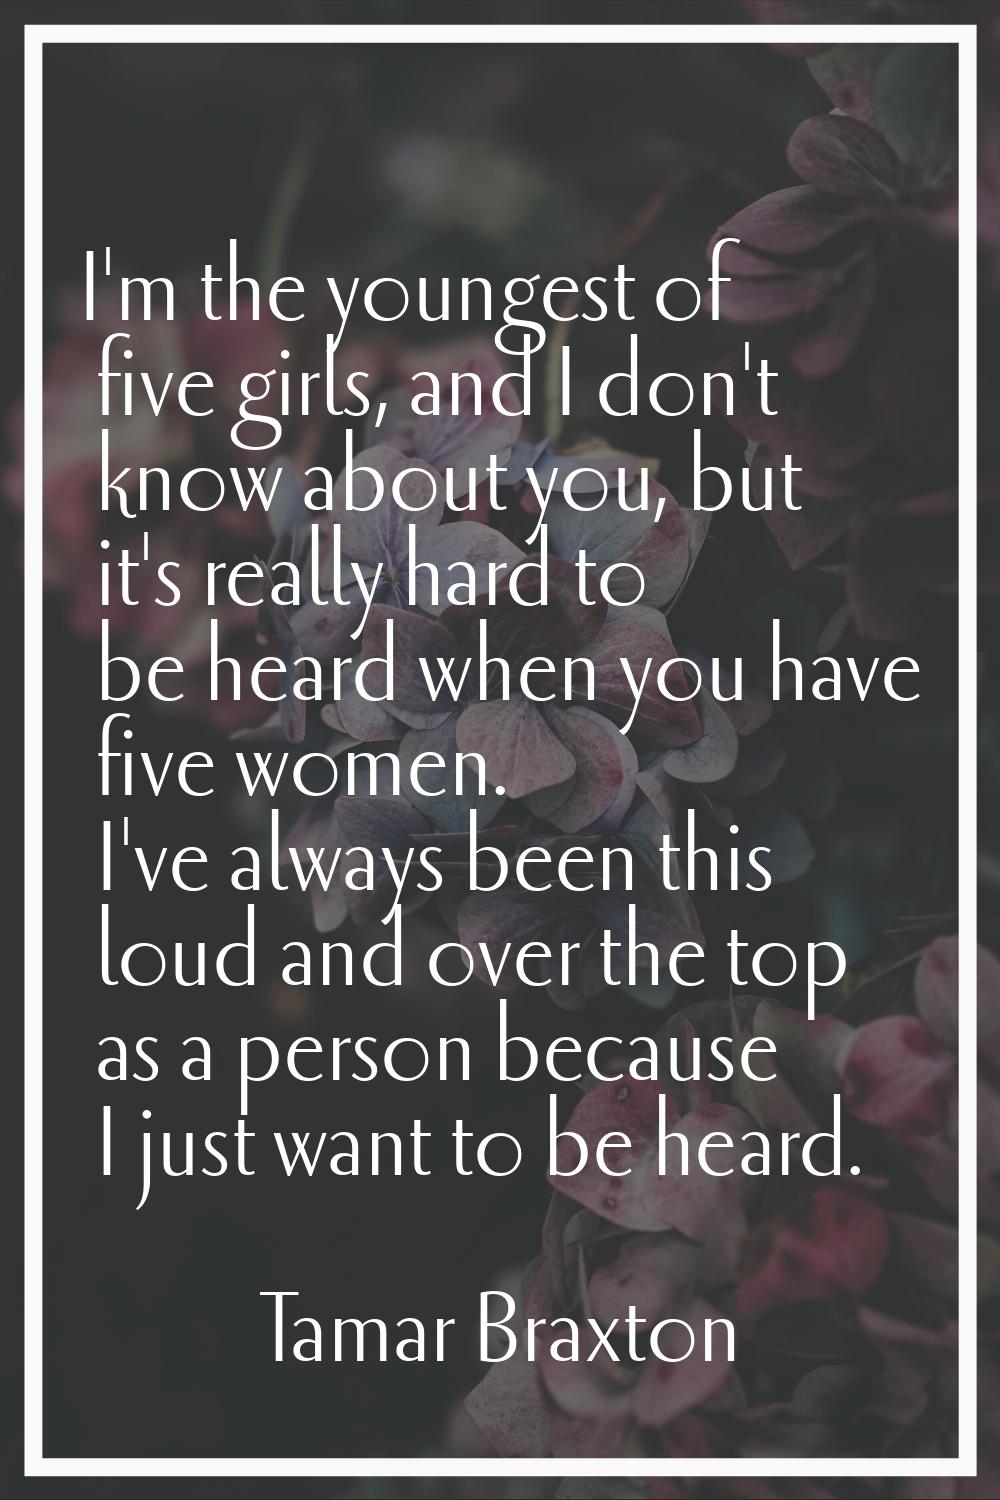 I'm the youngest of five girls, and I don't know about you, but it's really hard to be heard when y